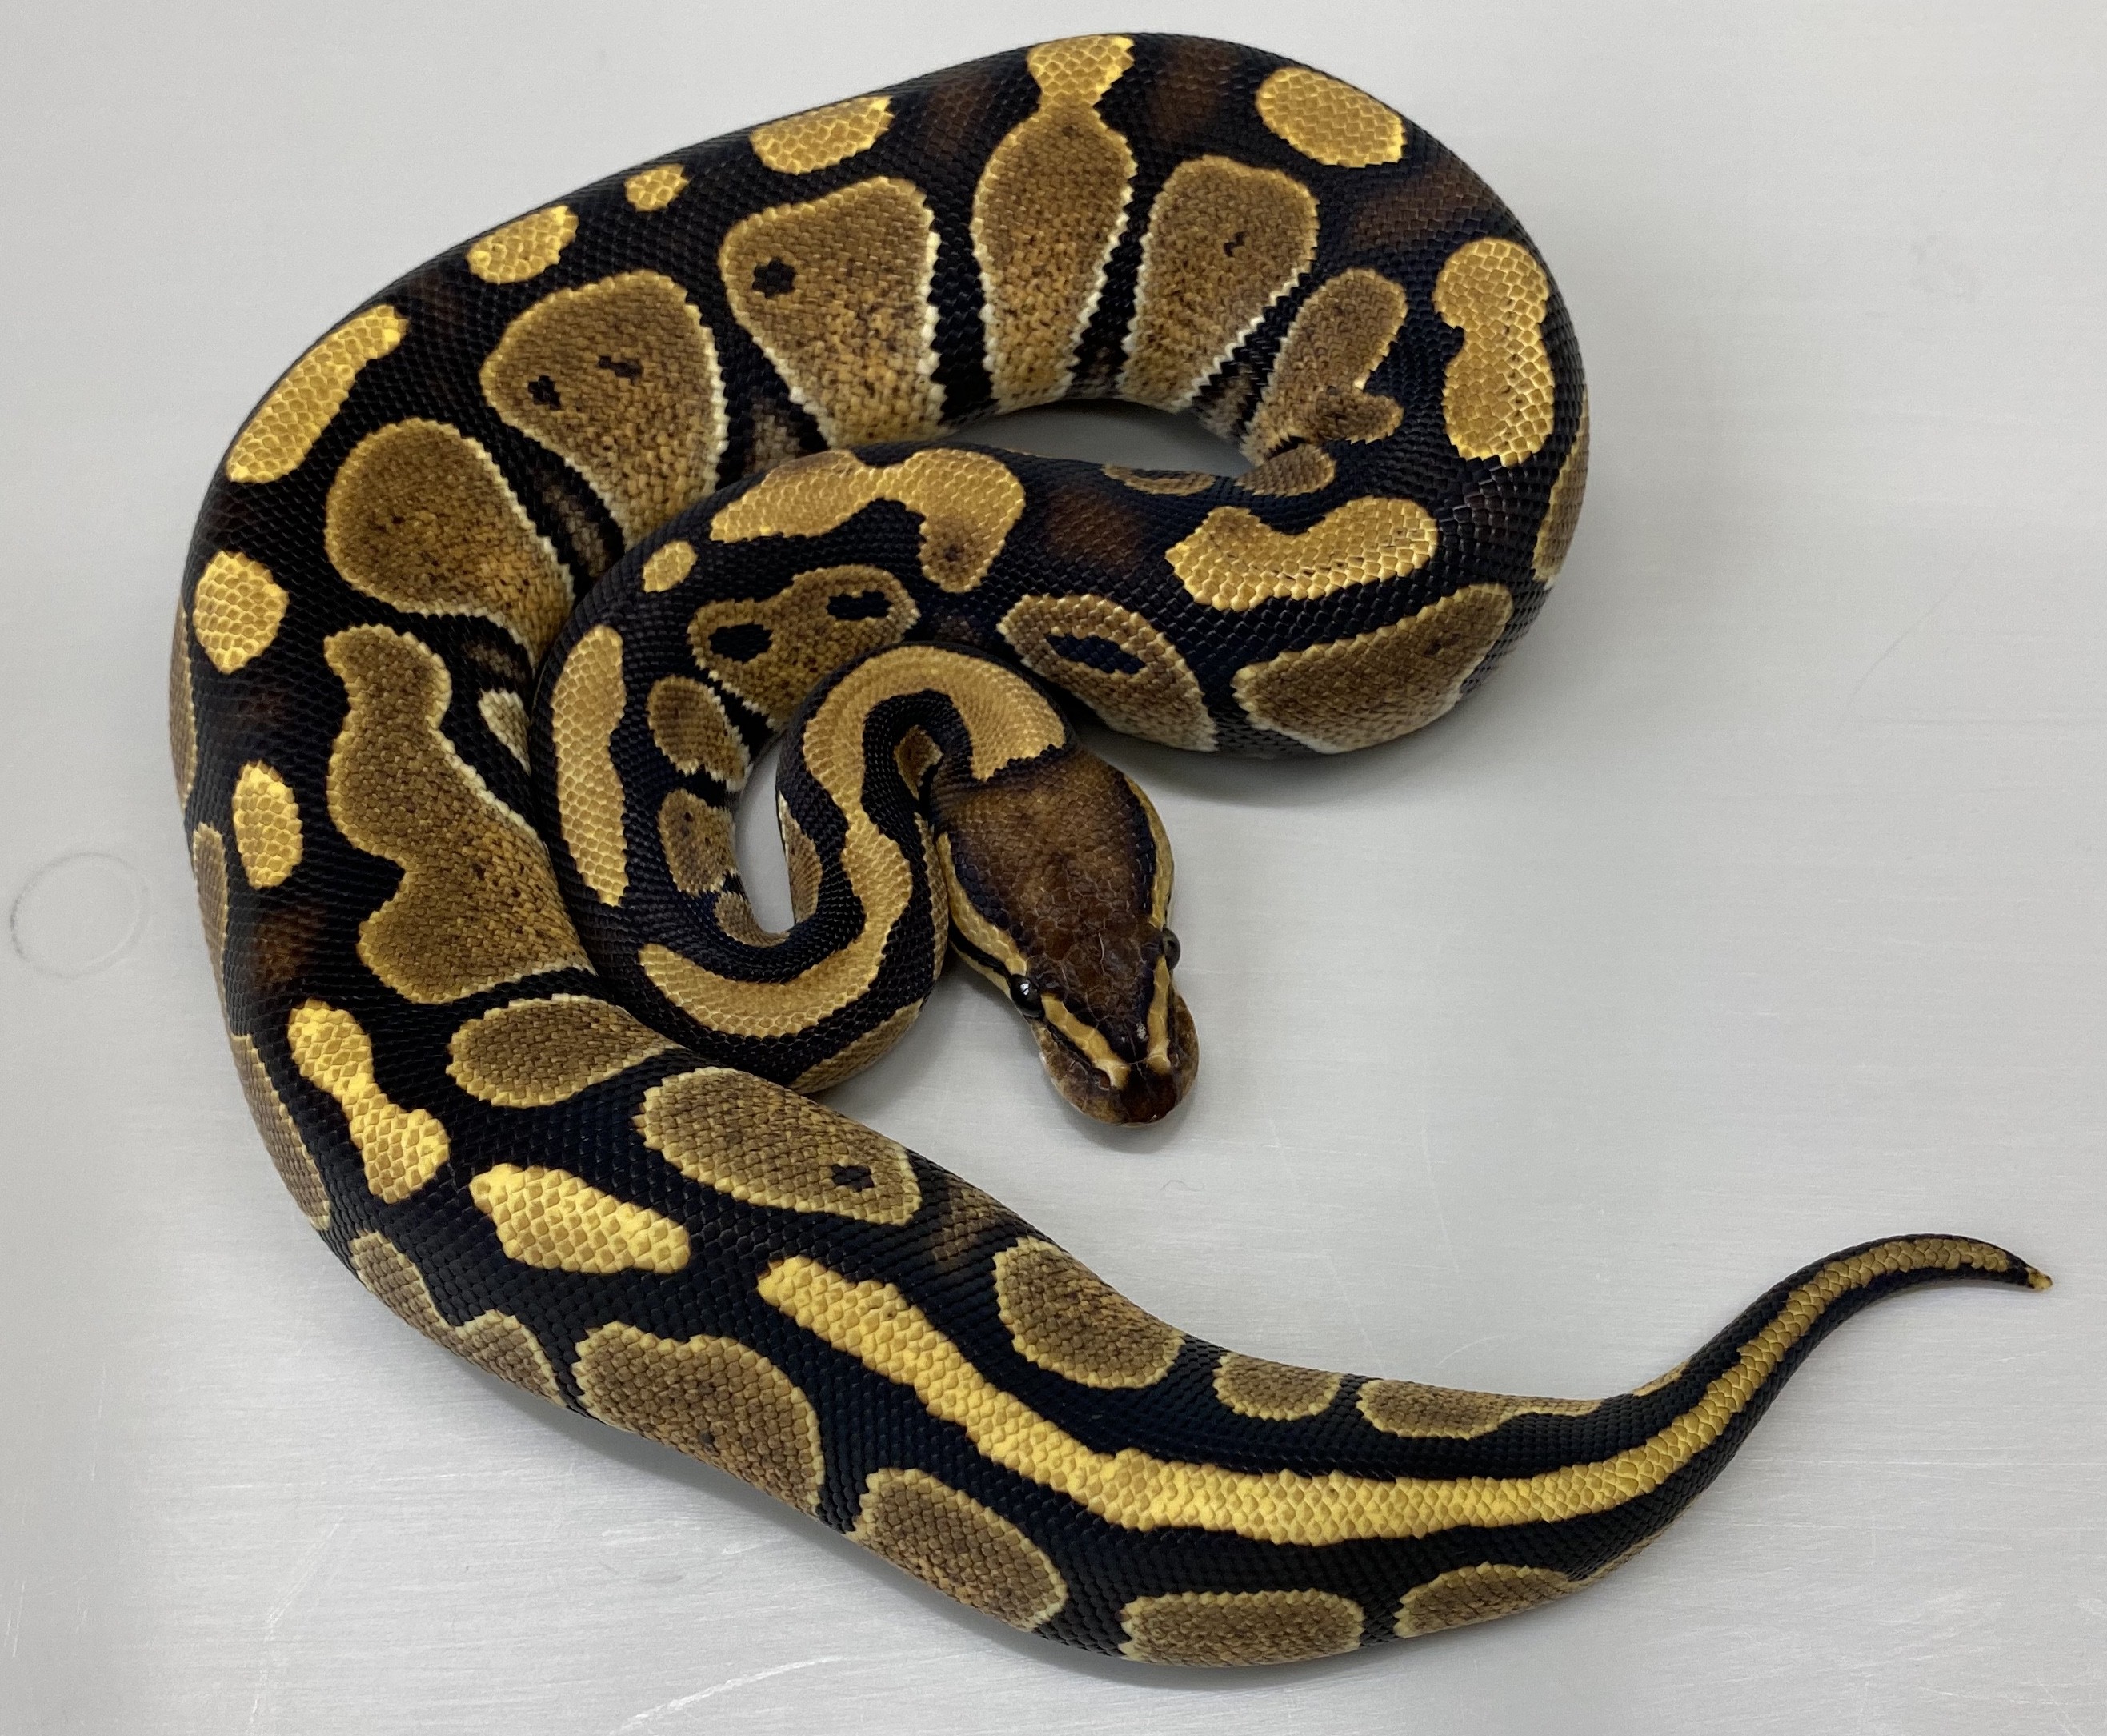 Specter Ball Python by Aesthetic Selection Reptiles